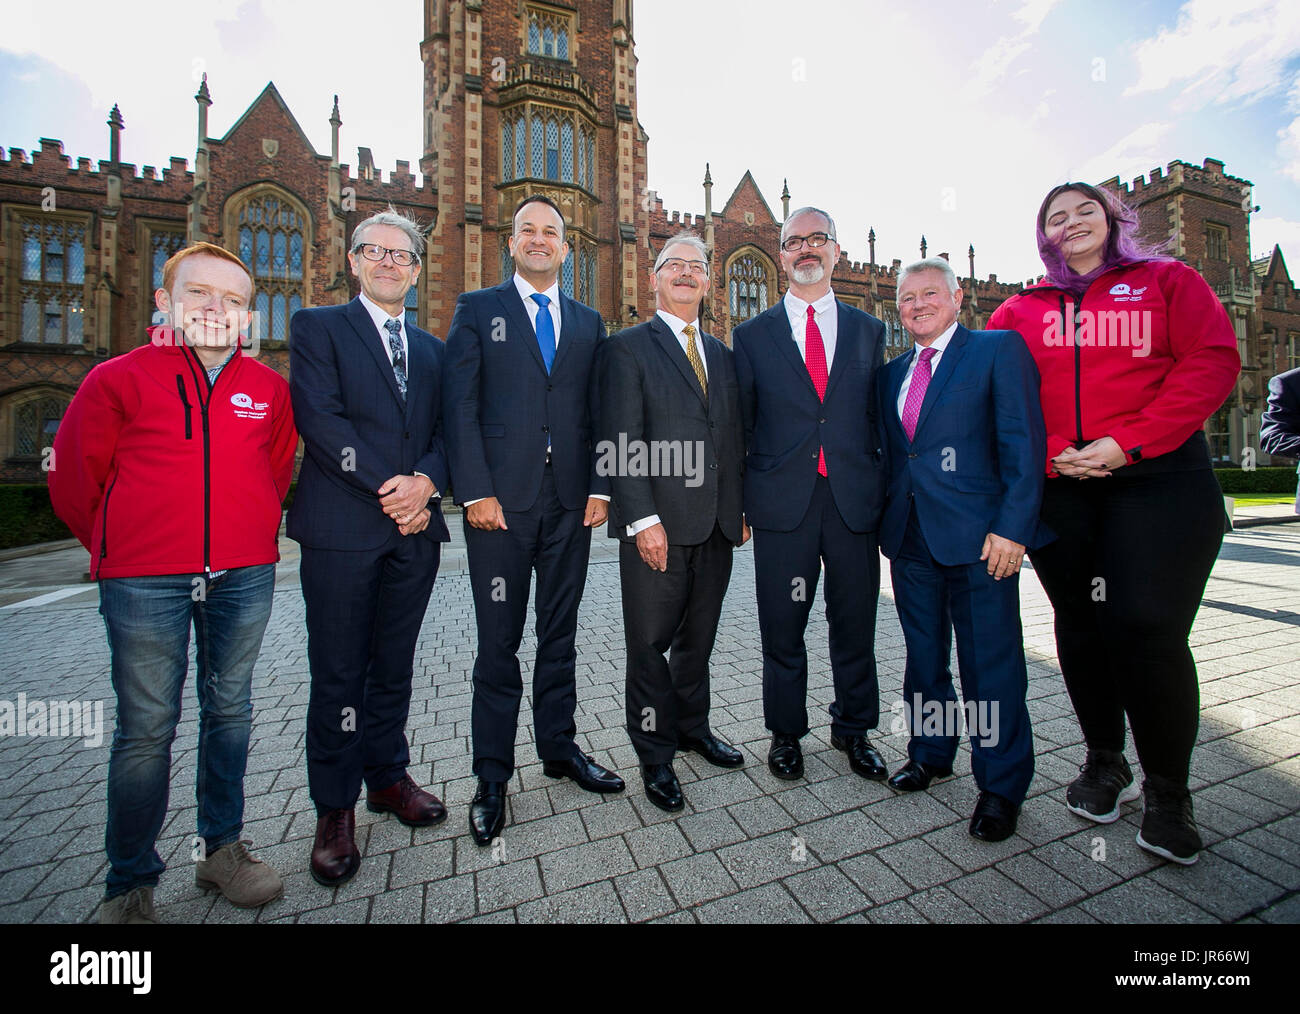 Irish Taoiseach Leo Varadkar (third left) is greeted at Queen's University in Belfast by (left to right) students' union president Sean Fearon, Professor David Jones, university president and vice-chancellor Professor James McElnay, vice-chancellor Richard English, pro-chancellor and chair of Senate Stephen Prenter and students' union welfare officer Jessica Elder. Stock Photo